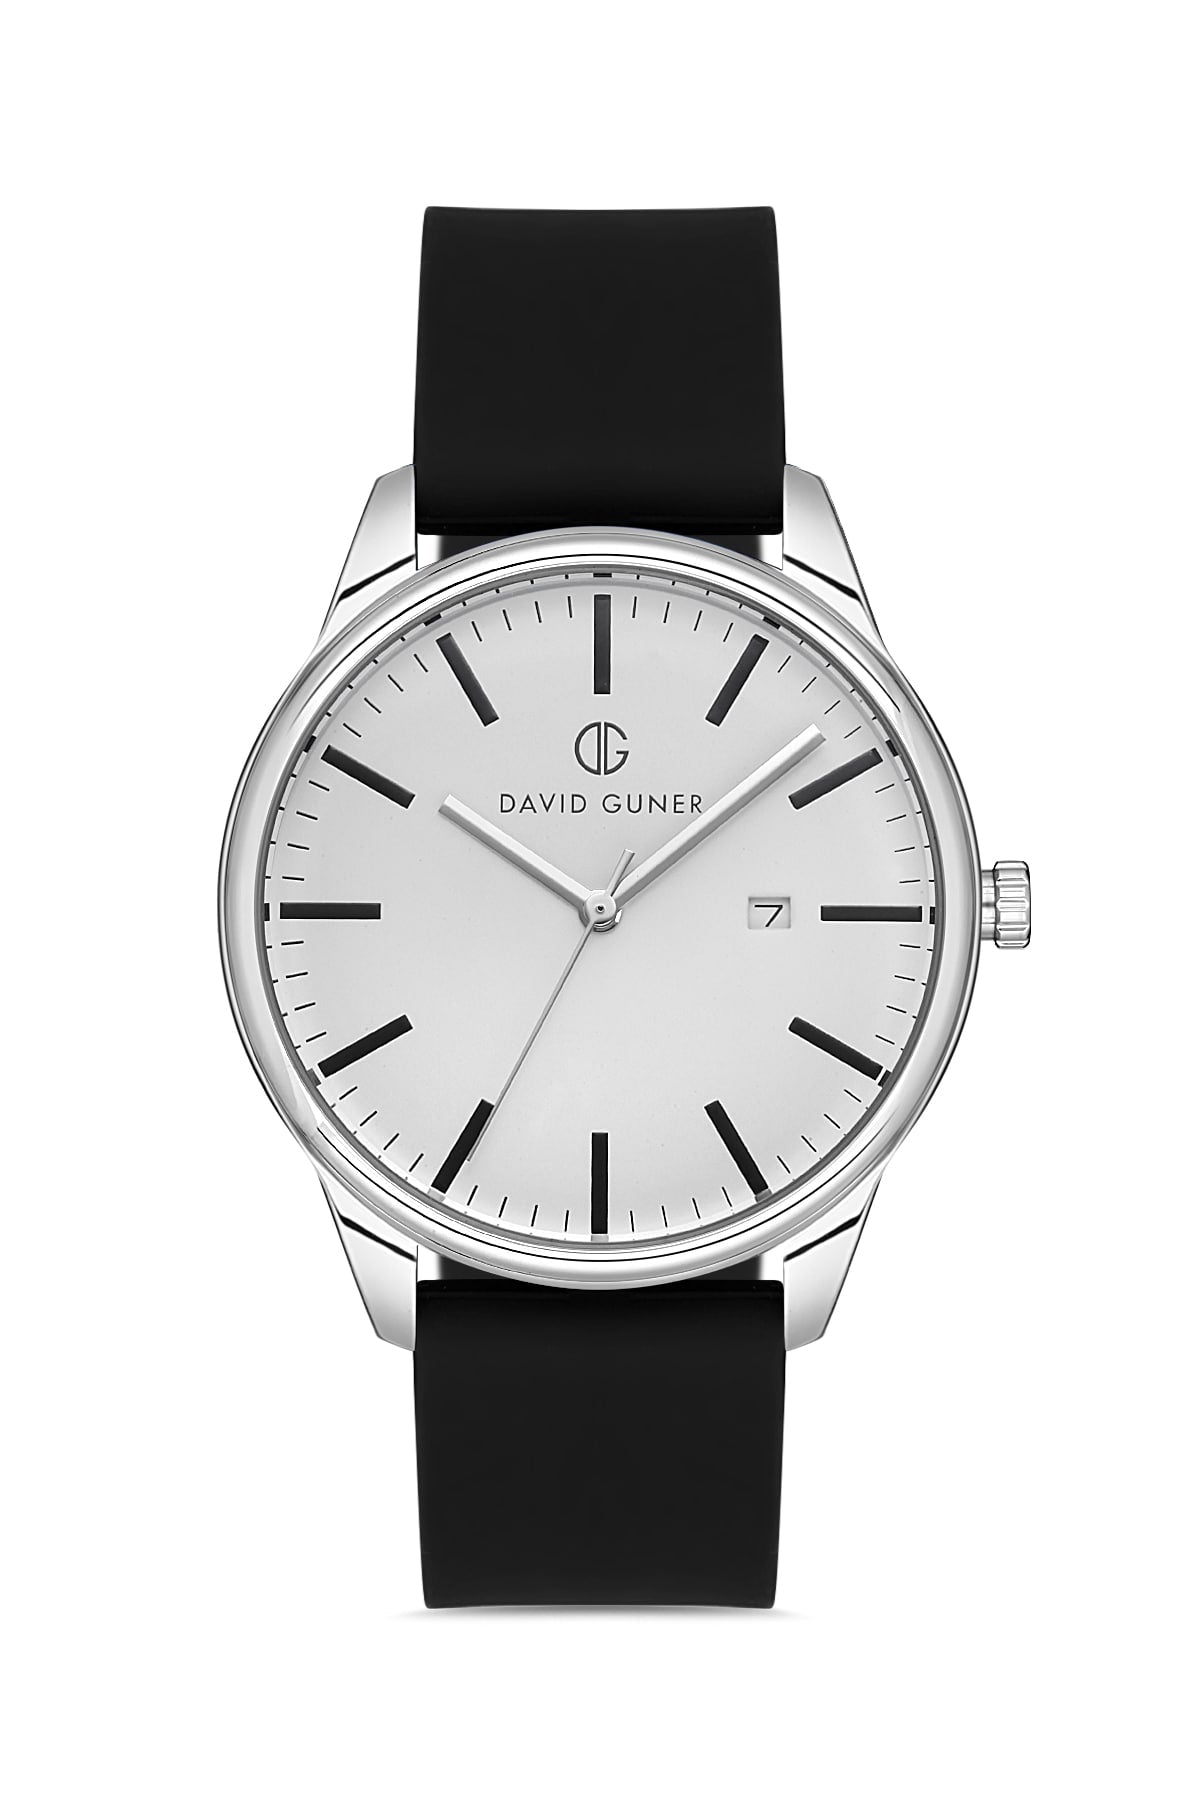 DAVID GUNER Men's Wristwatch with Silver Dial, Silver Plated, Black Silicone Strap and Calendar